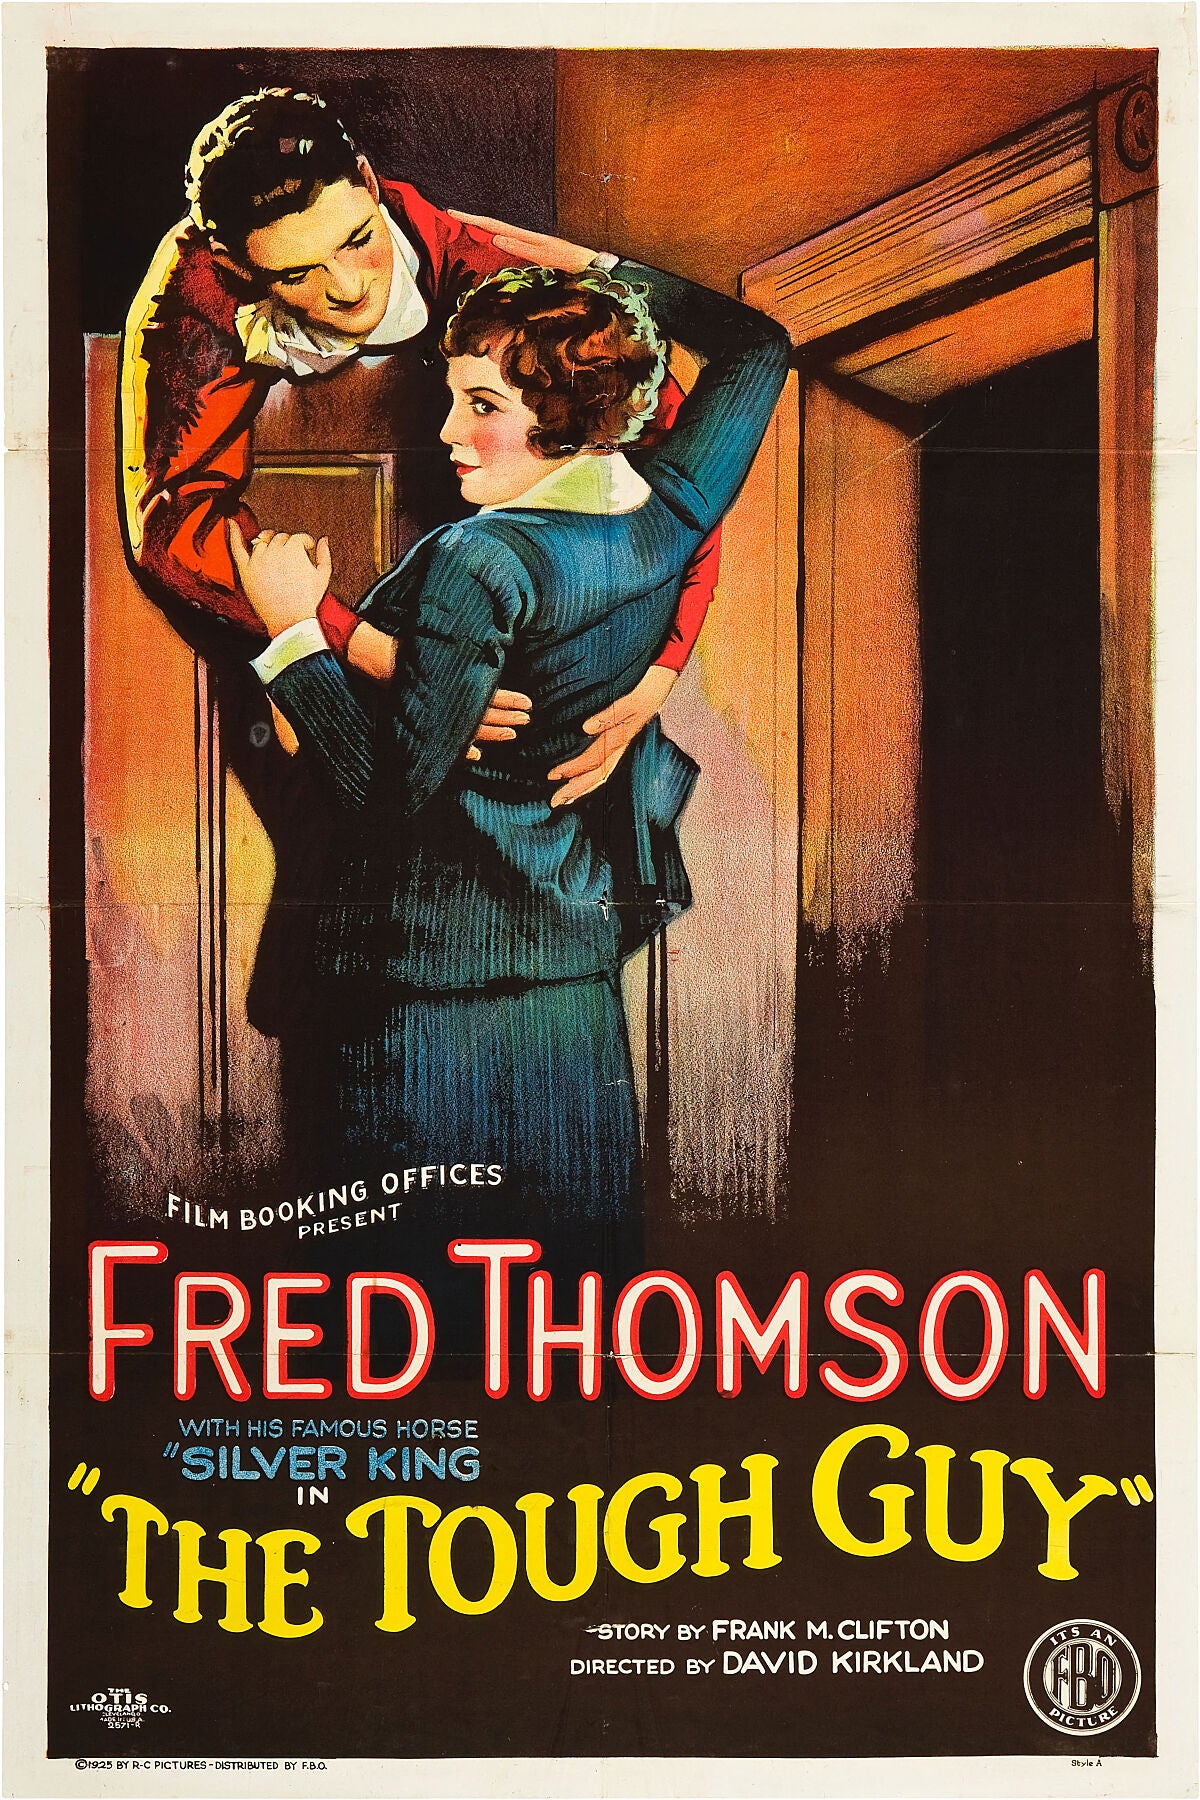 Print of a poster for The Tough Guy movie, 1925.